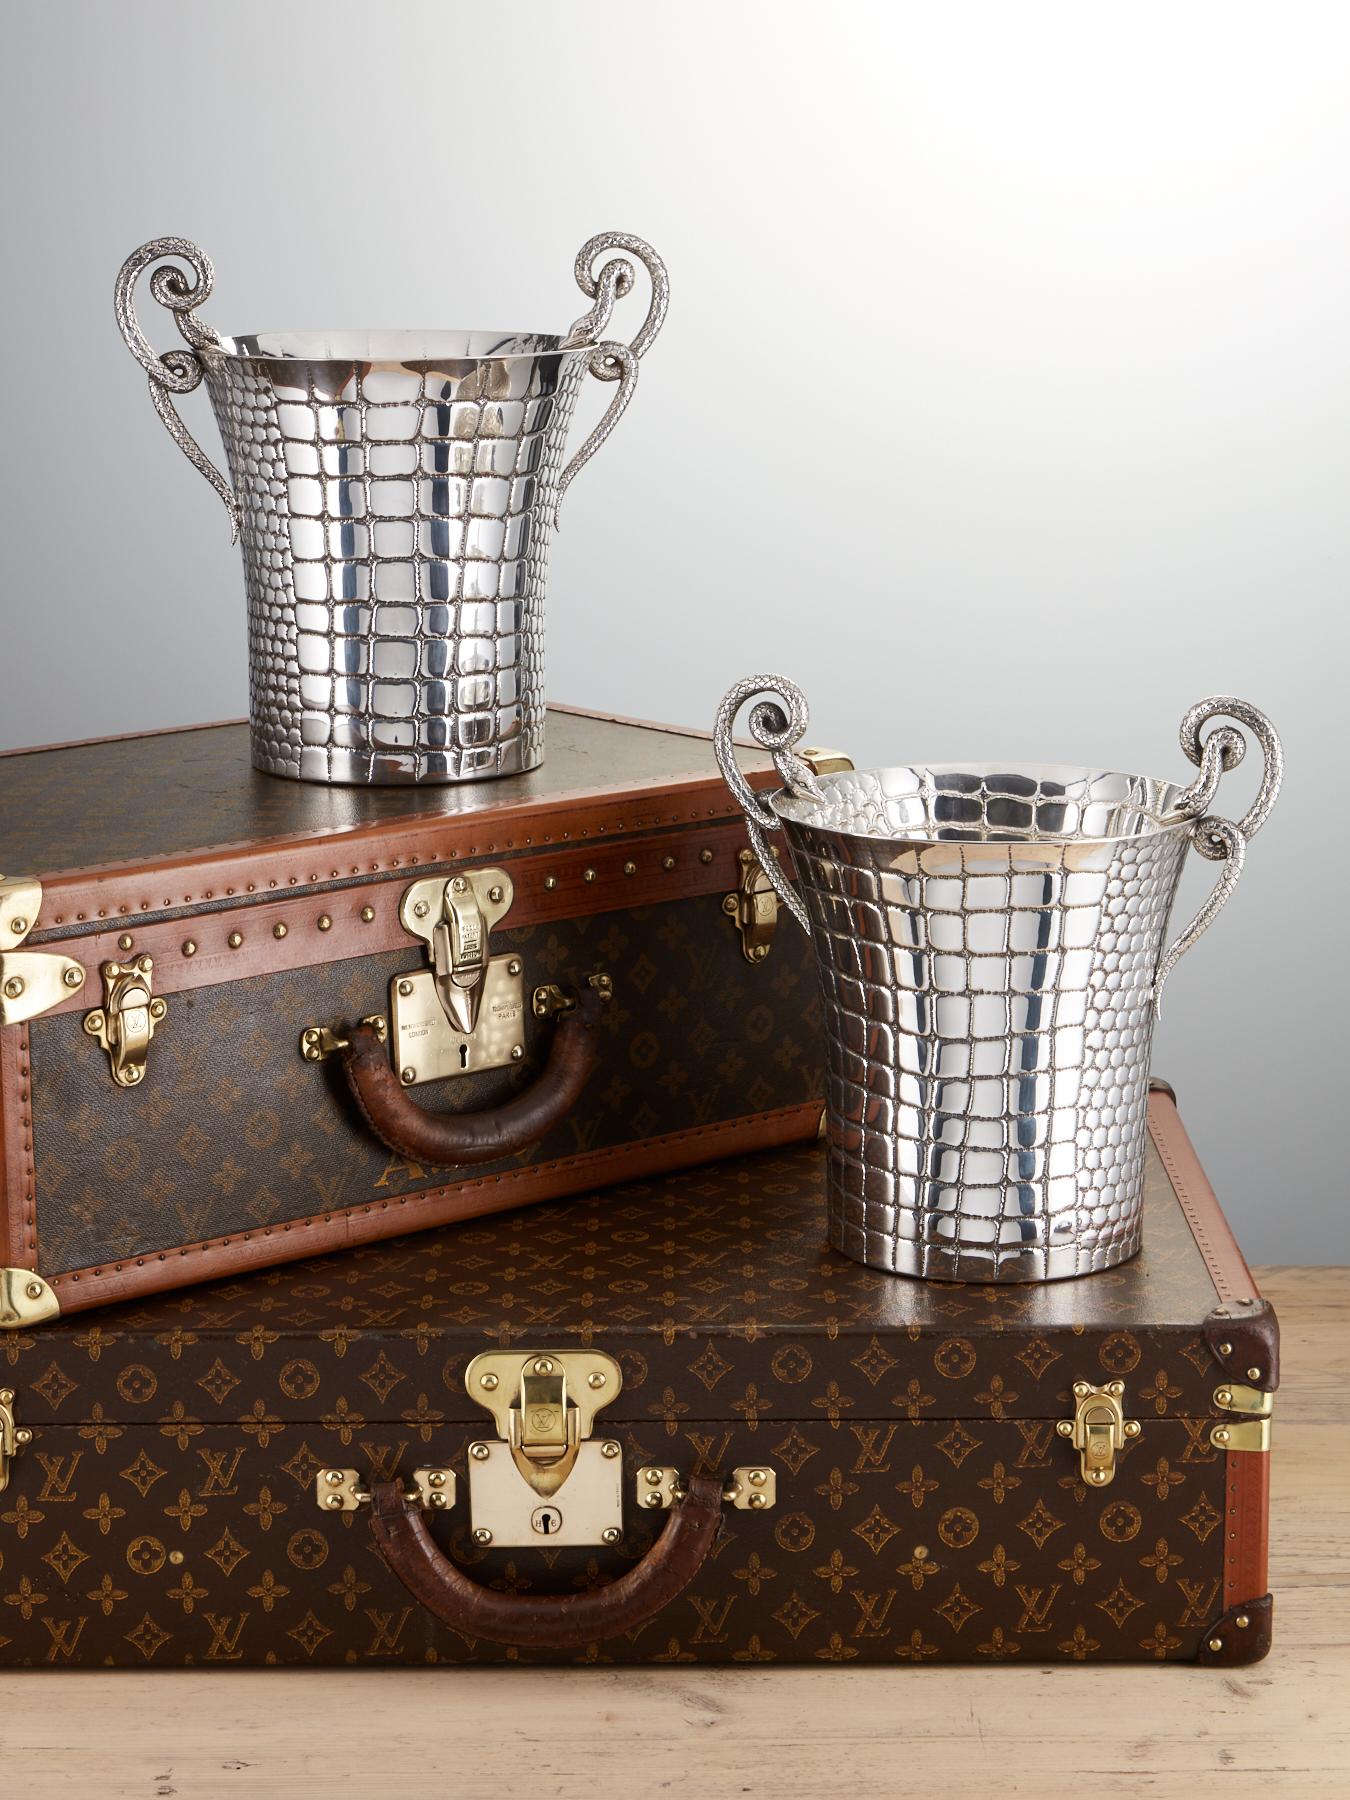 Italian Mid-20th Century Silver Champagne Cooler Pair by Paolo Scavia Circa 1945-1950  For Sale